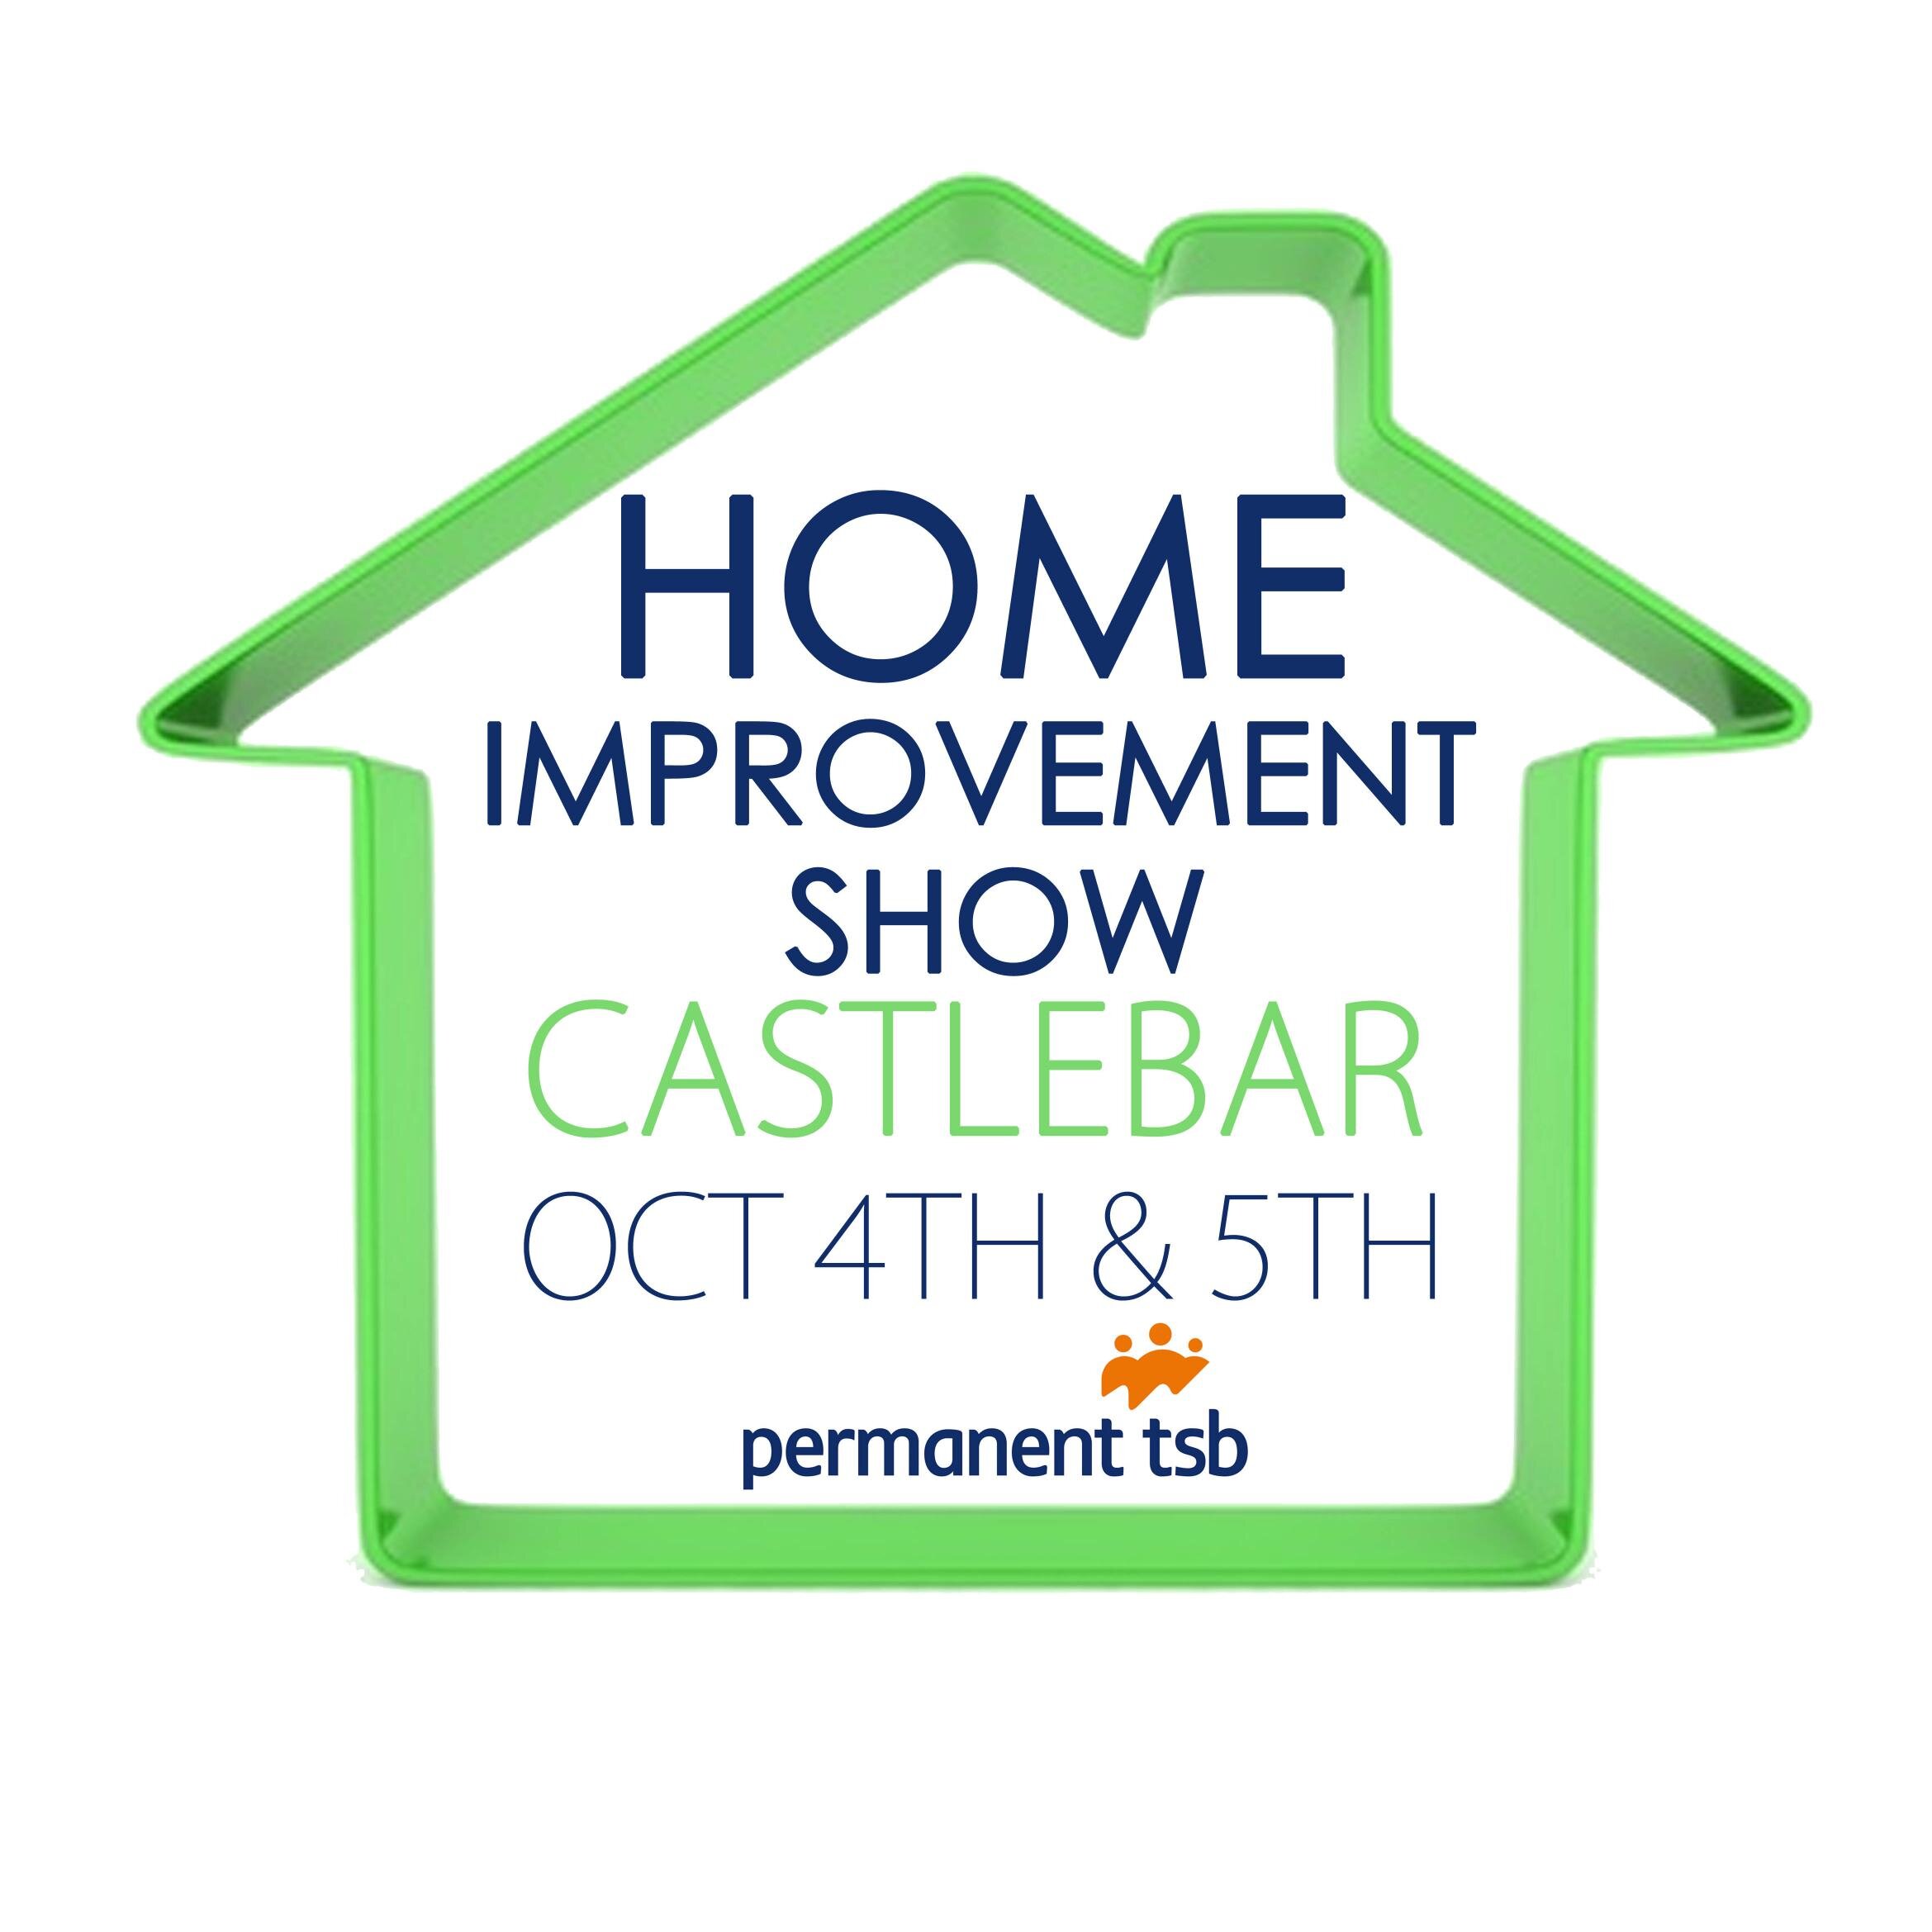 Events Planning=FOLLOW TO GET UPDATES ON LATEST EVENTS IN YOUR AREA!! Check out our next exhibition- @HomeImproveShow.